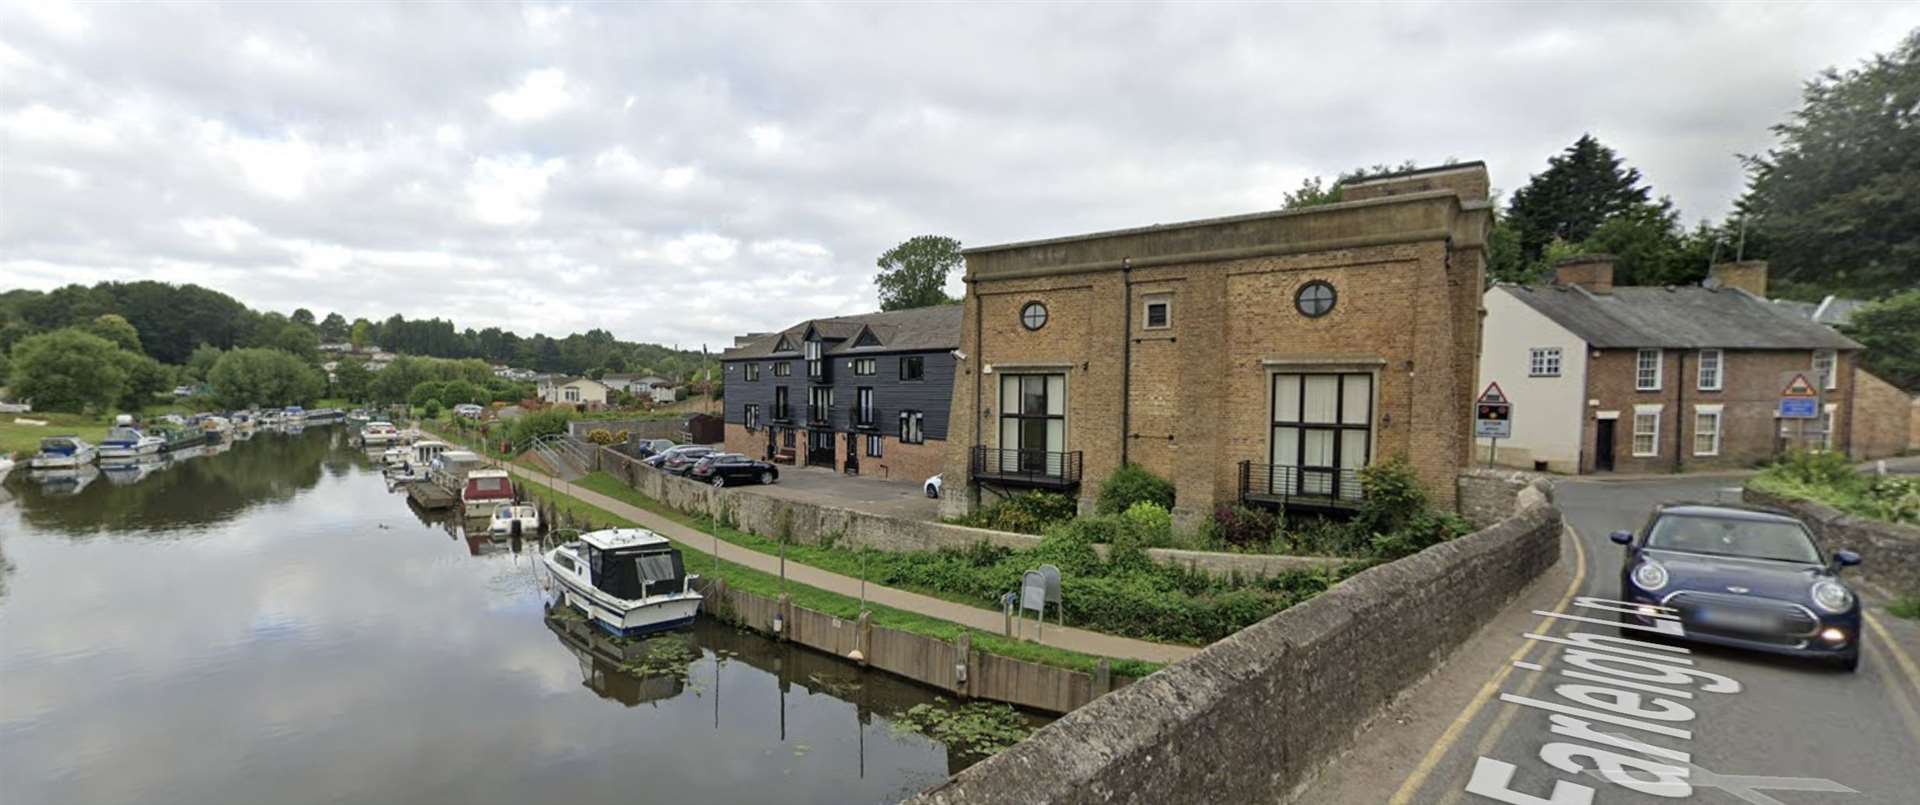 The view of the towpath and Riverside Park houses behind it. Picture: Google Maps